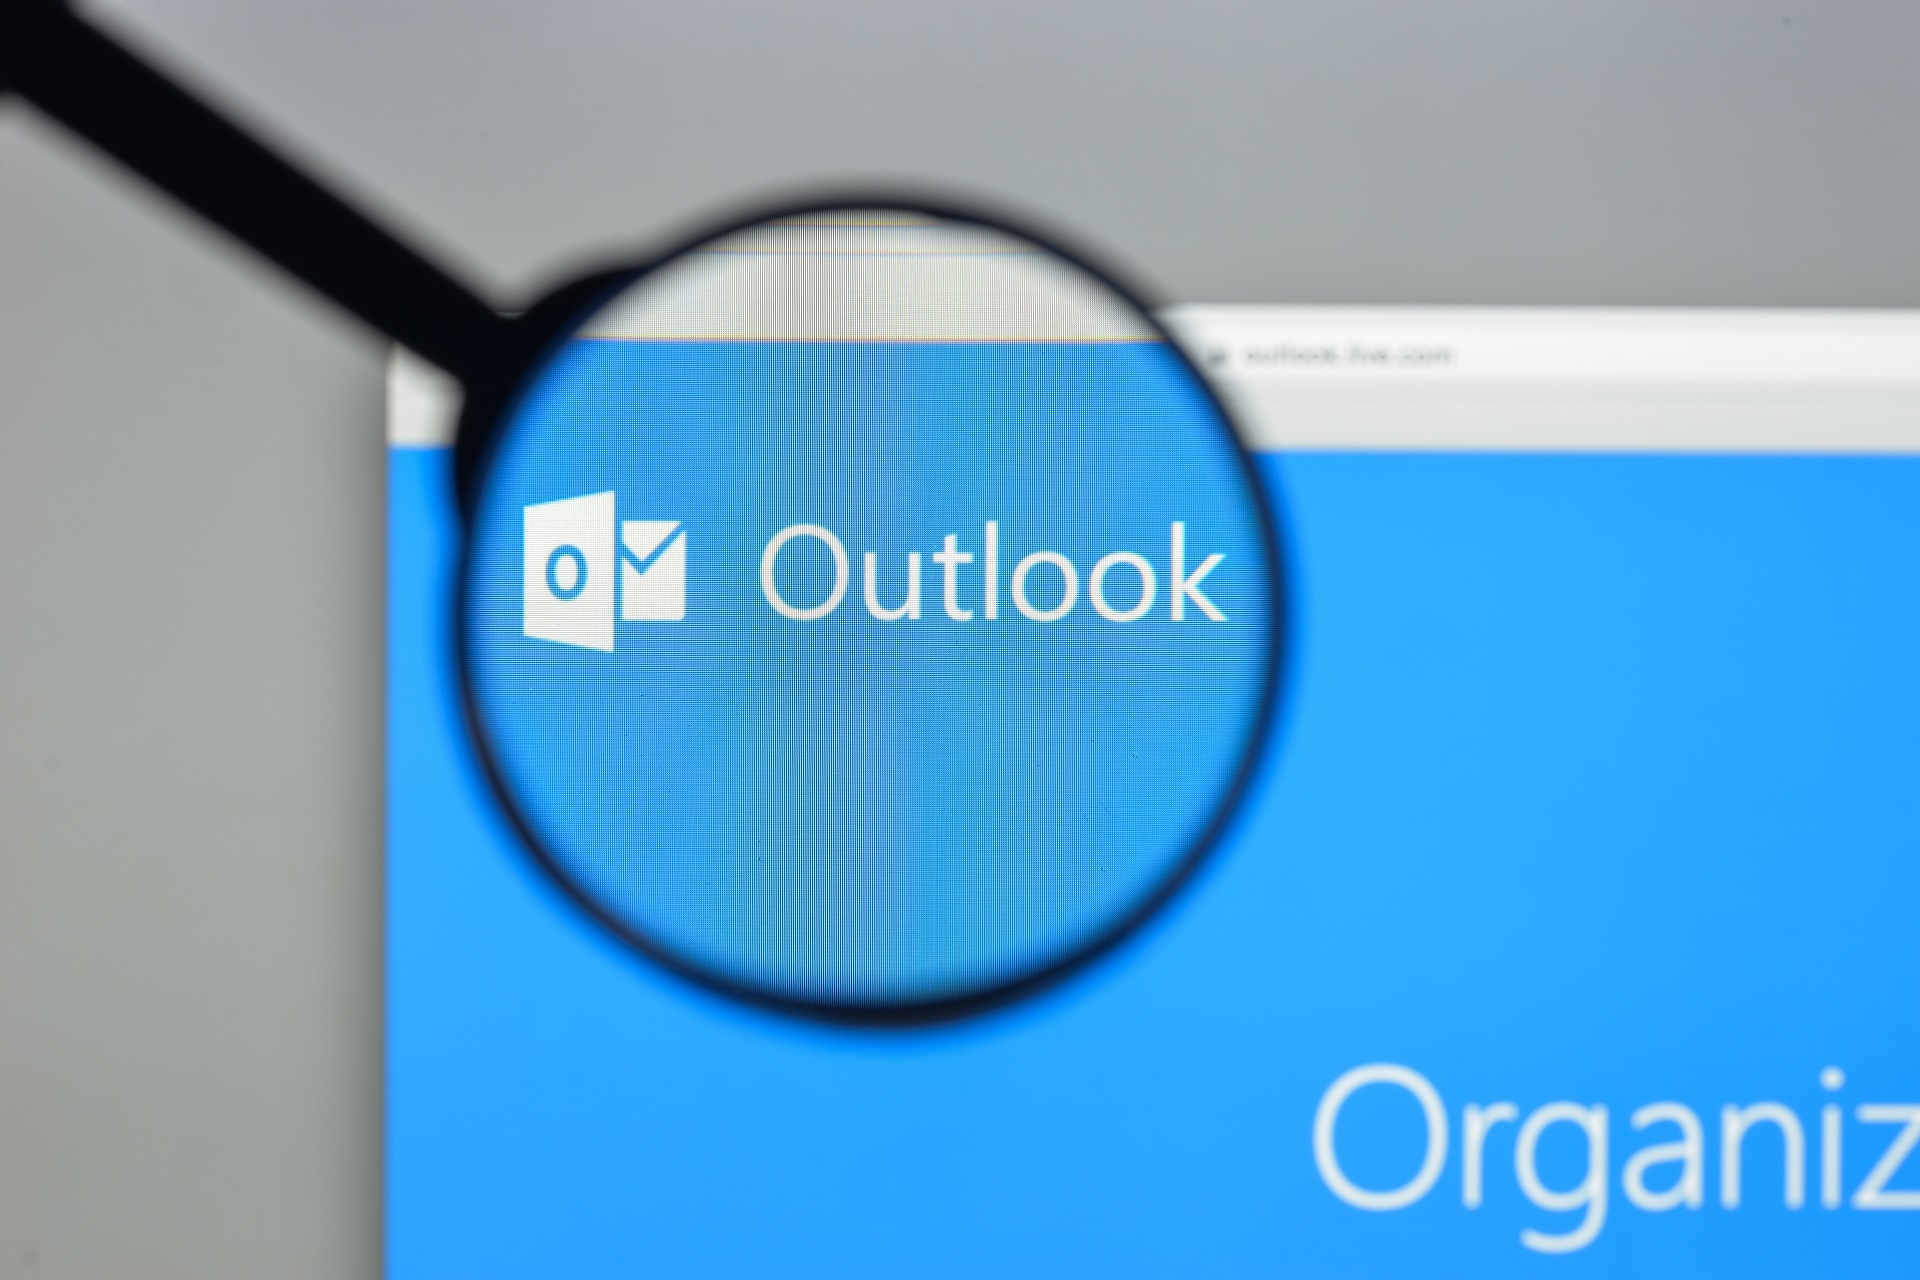 Outlook may not remember your password after Windows updates